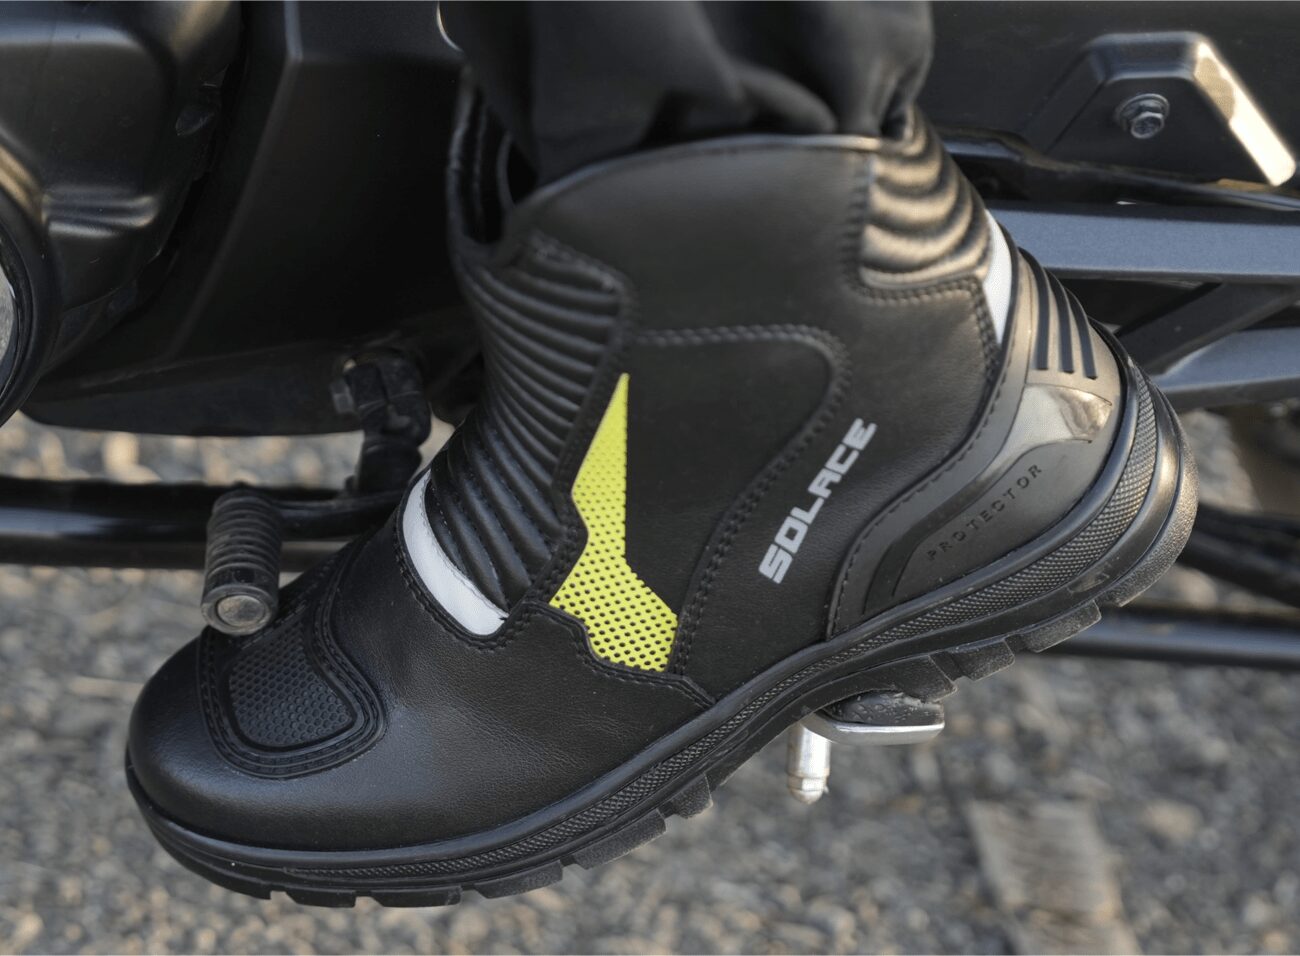 Scout Motorcycle Boots (B.Neon)